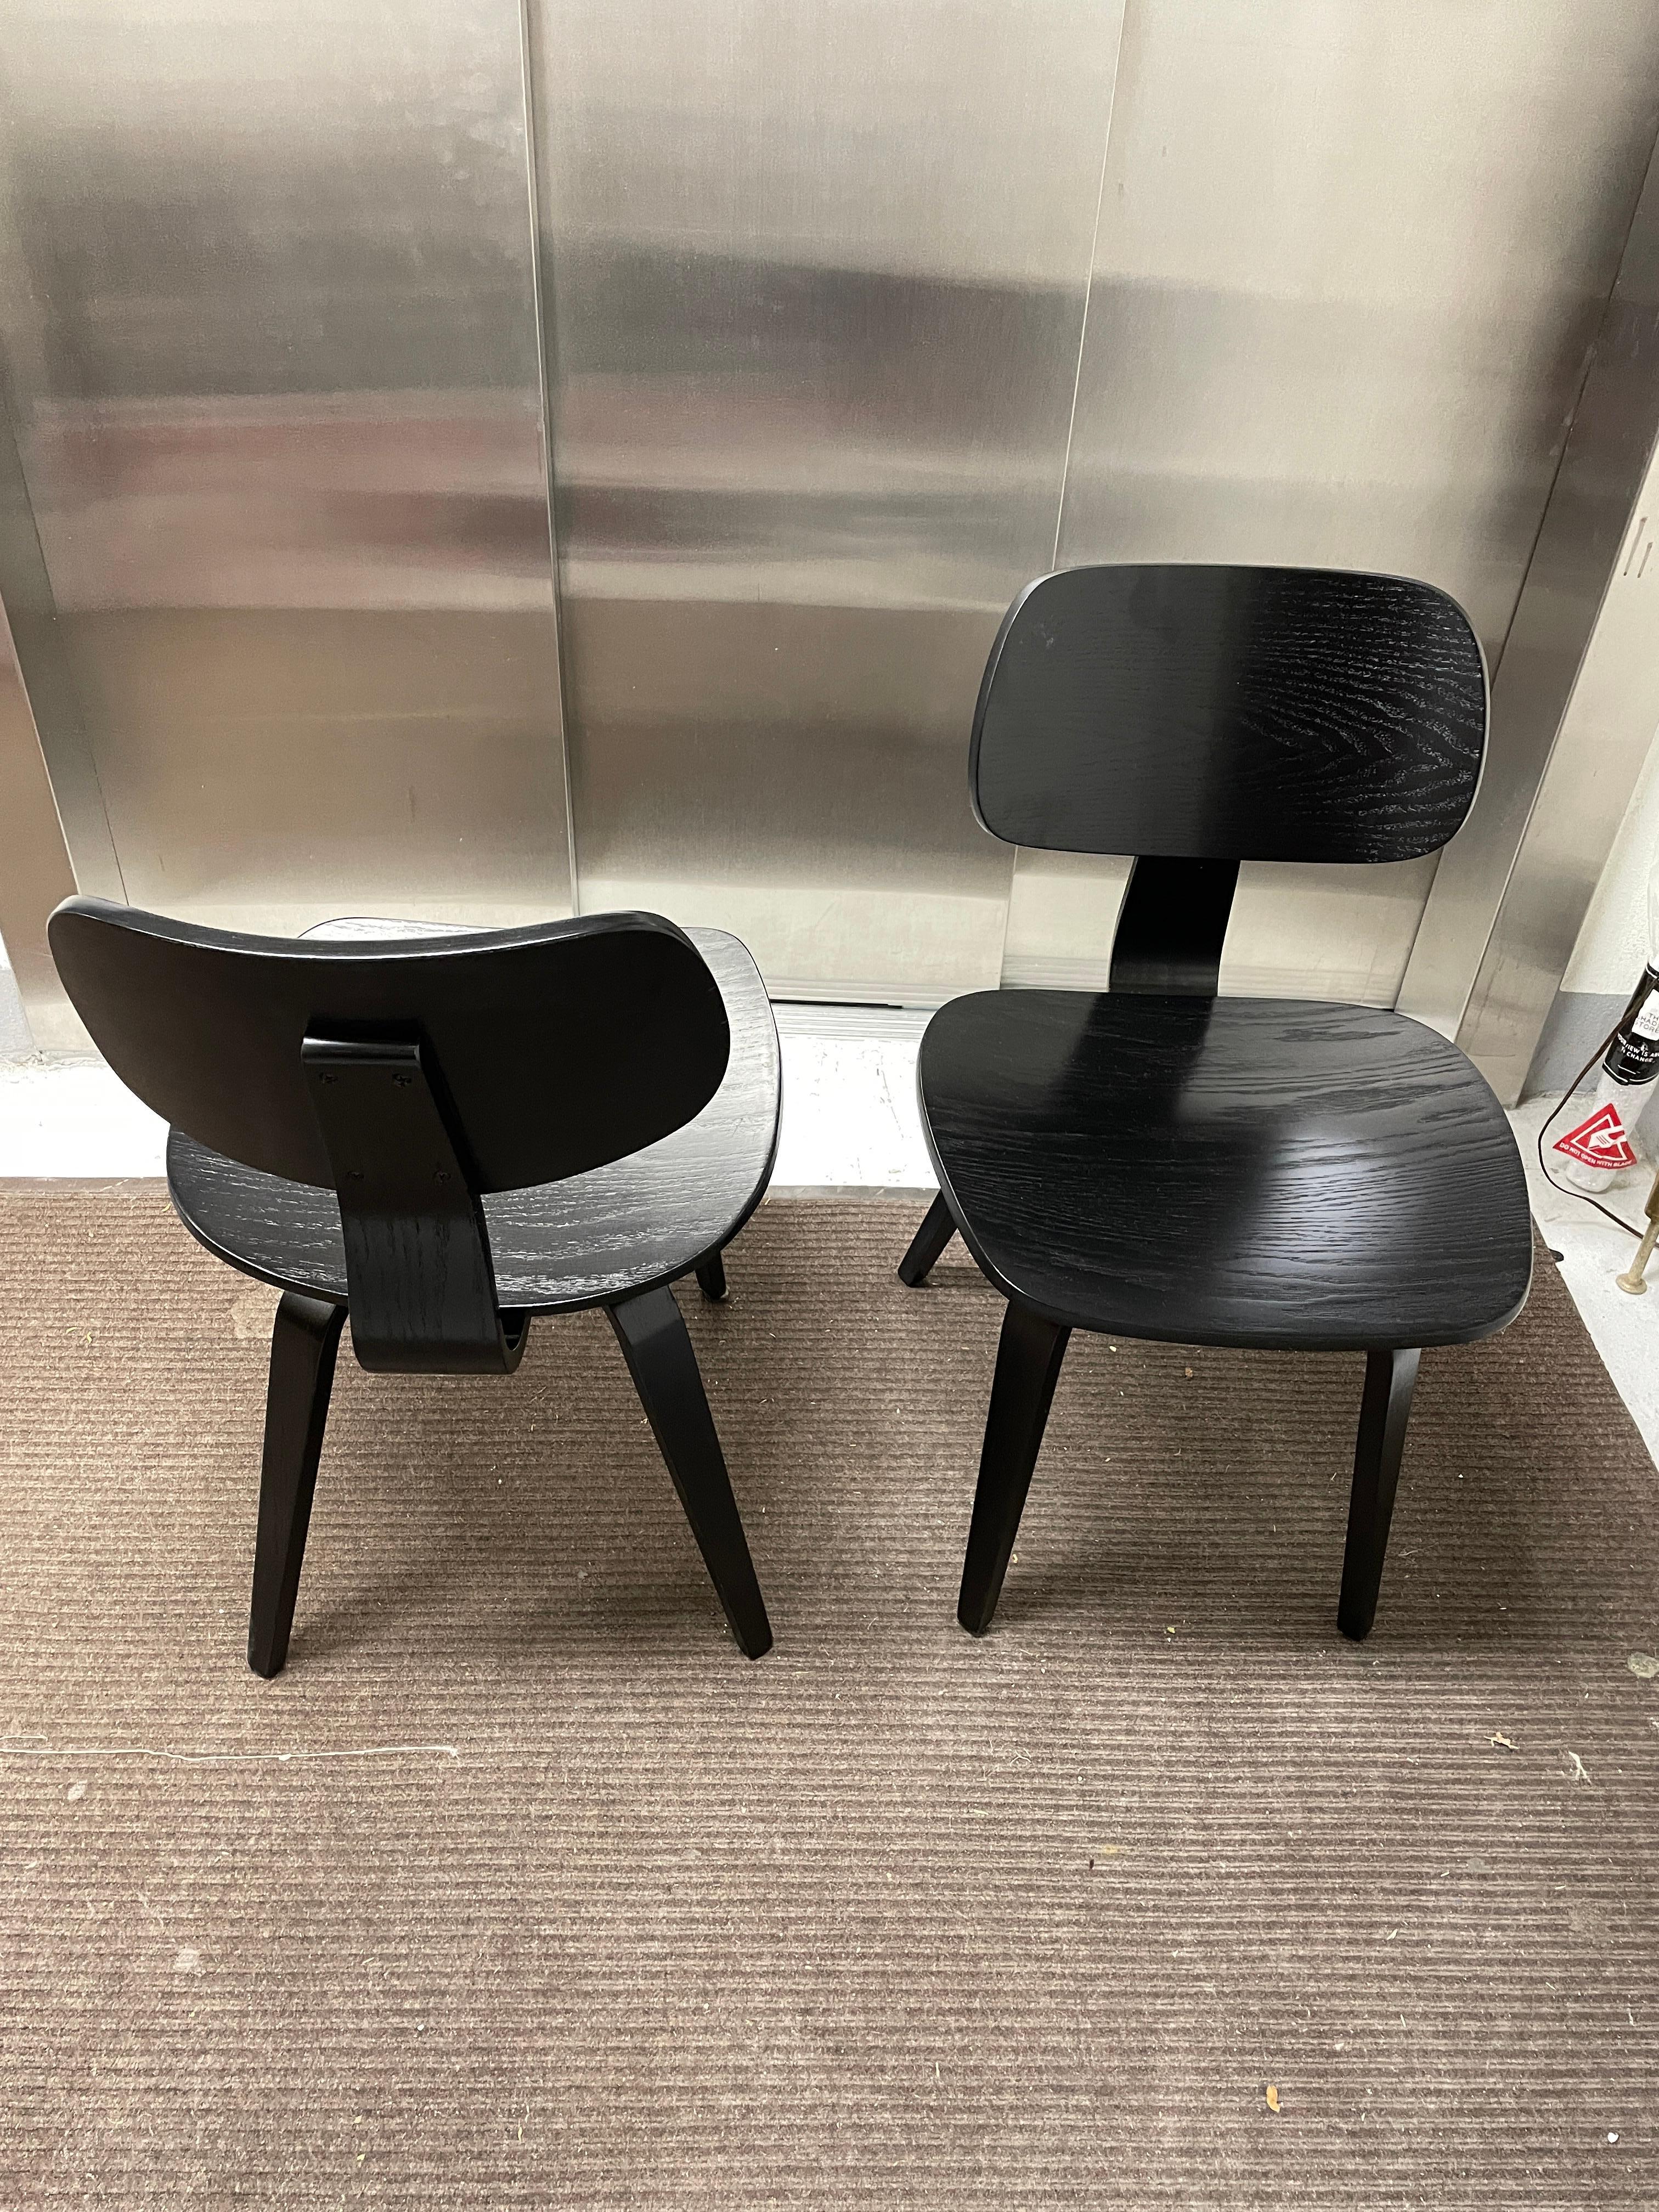 Pair of Thonet bentwood chairs.
There is some wear and tear, but they are sturdy.
They have been sanded and stained.
These are from a CFDA member hat designer's showroom. A full set of 12 was purchased from either Thonet or the NYC representative